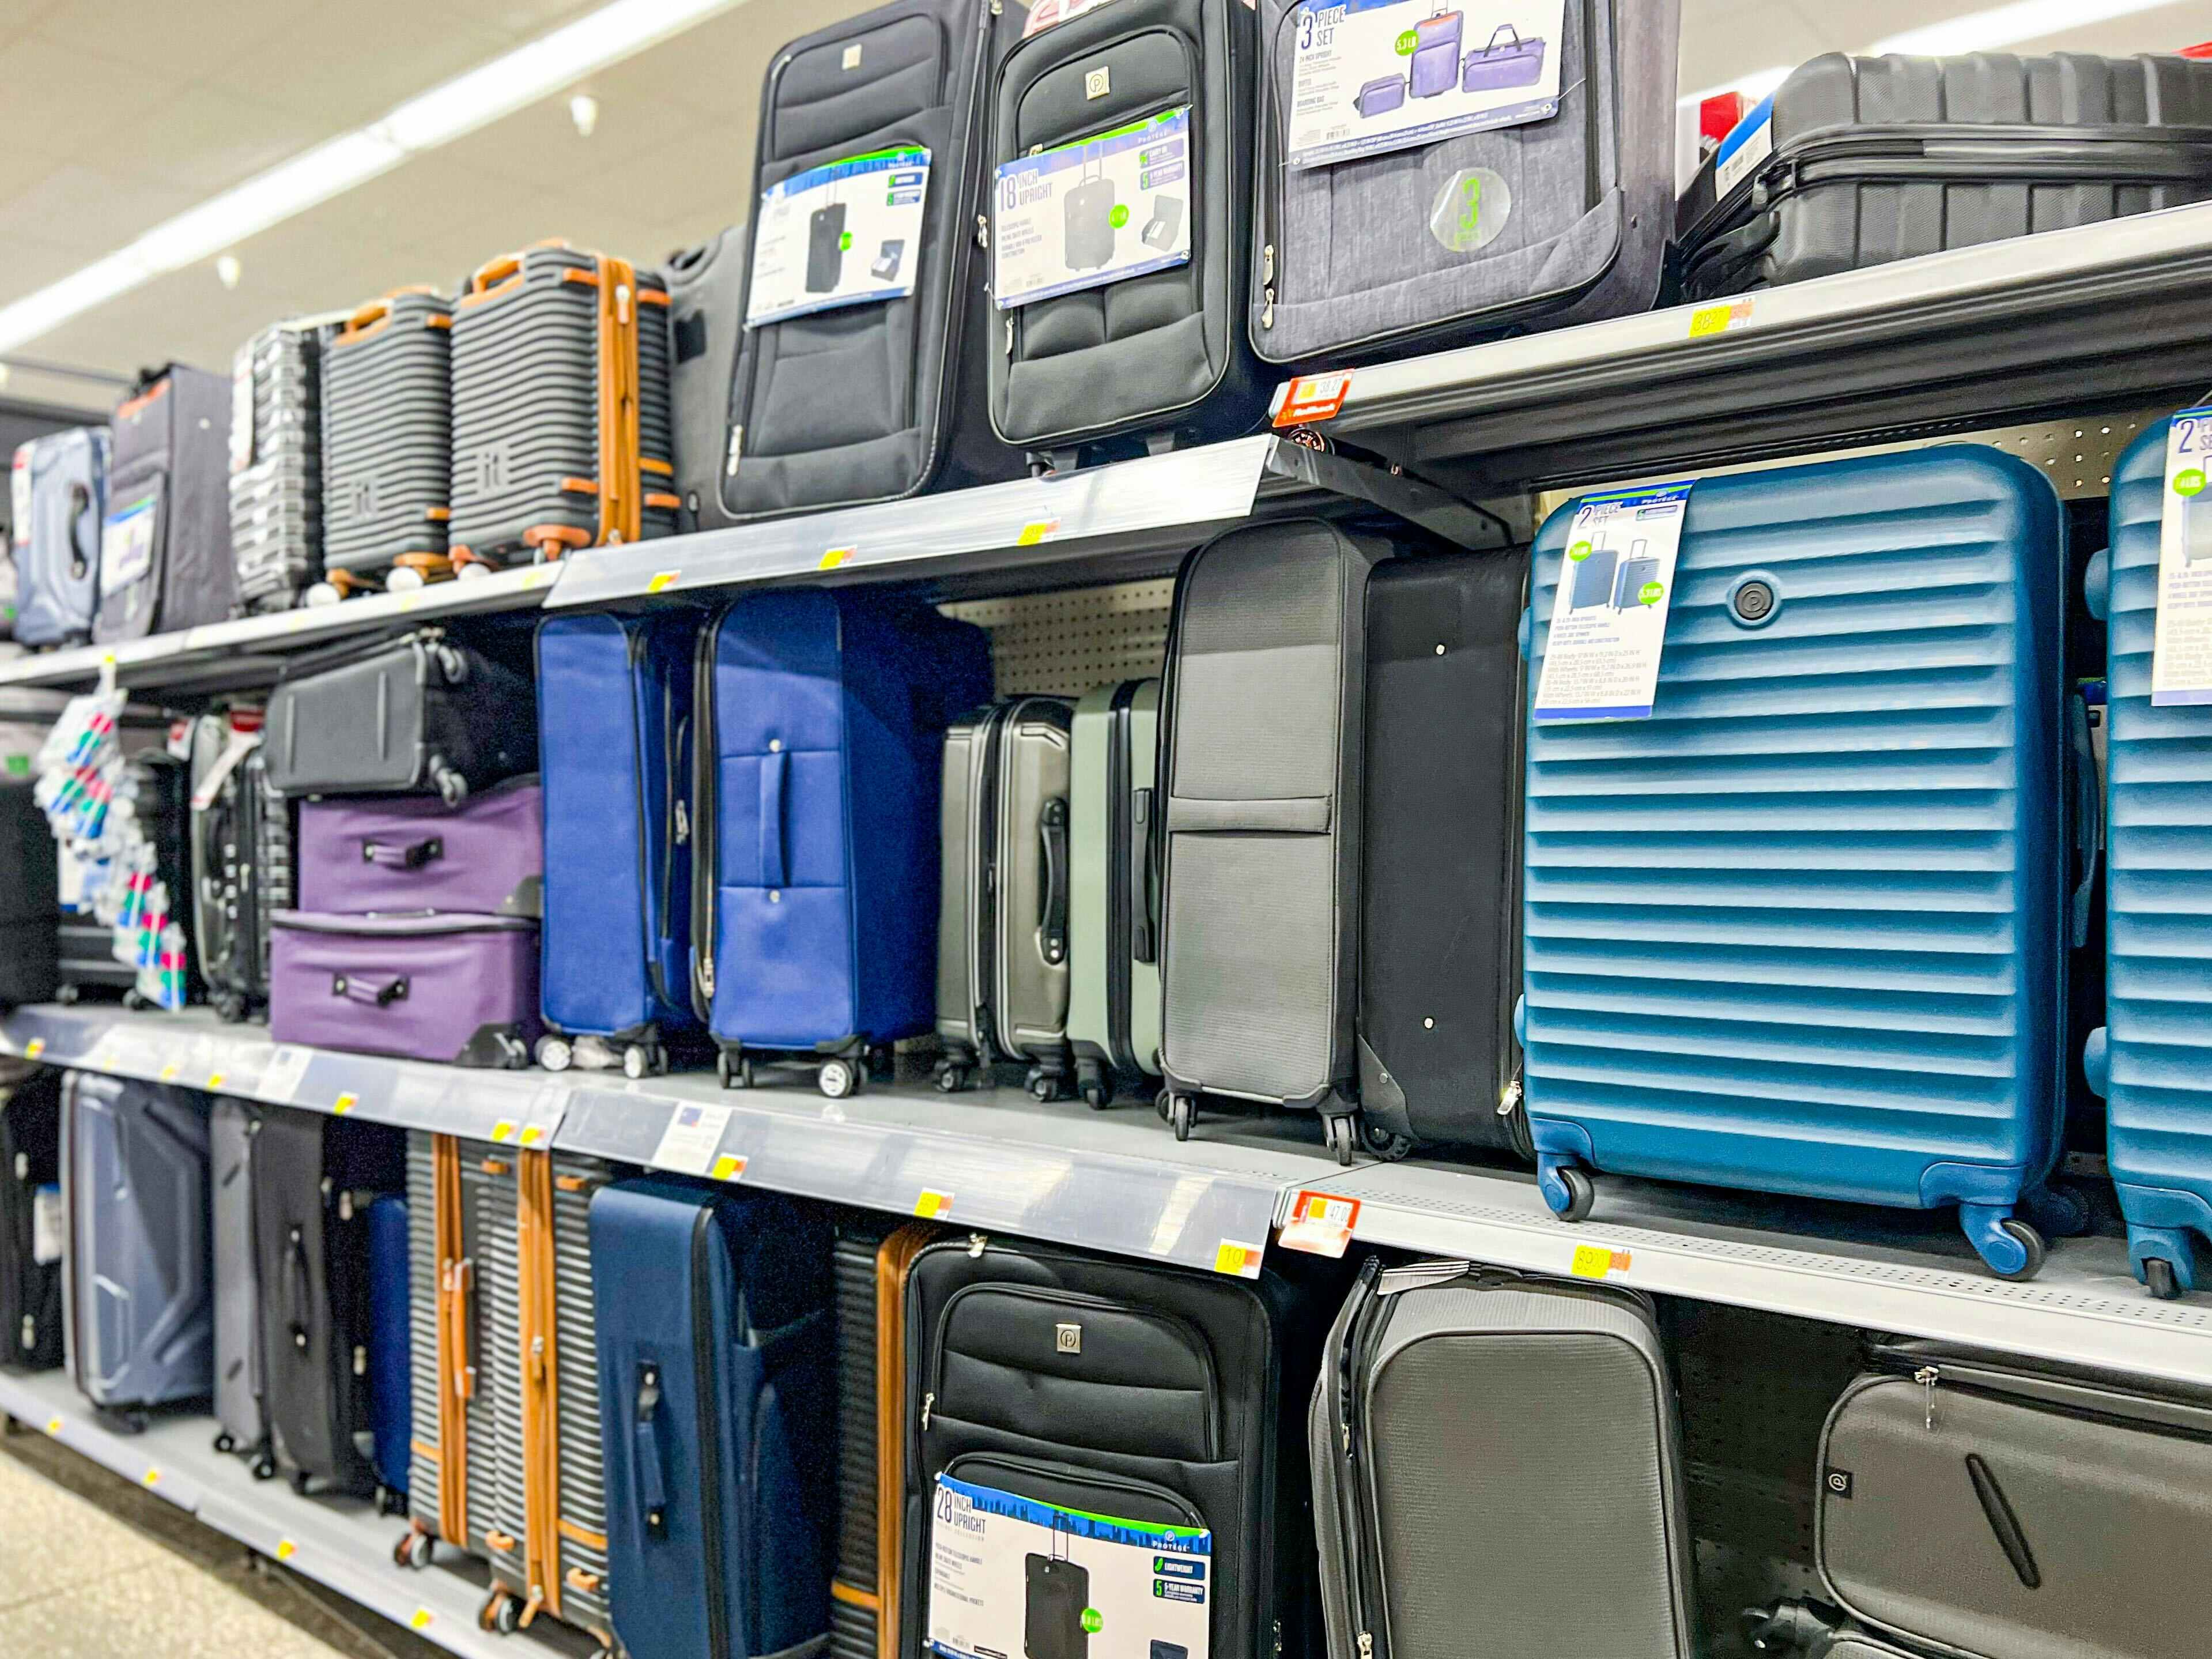 Bestselling Hardside Spinner 5-Piece Luggage Set, Now Only $62 at Walmart